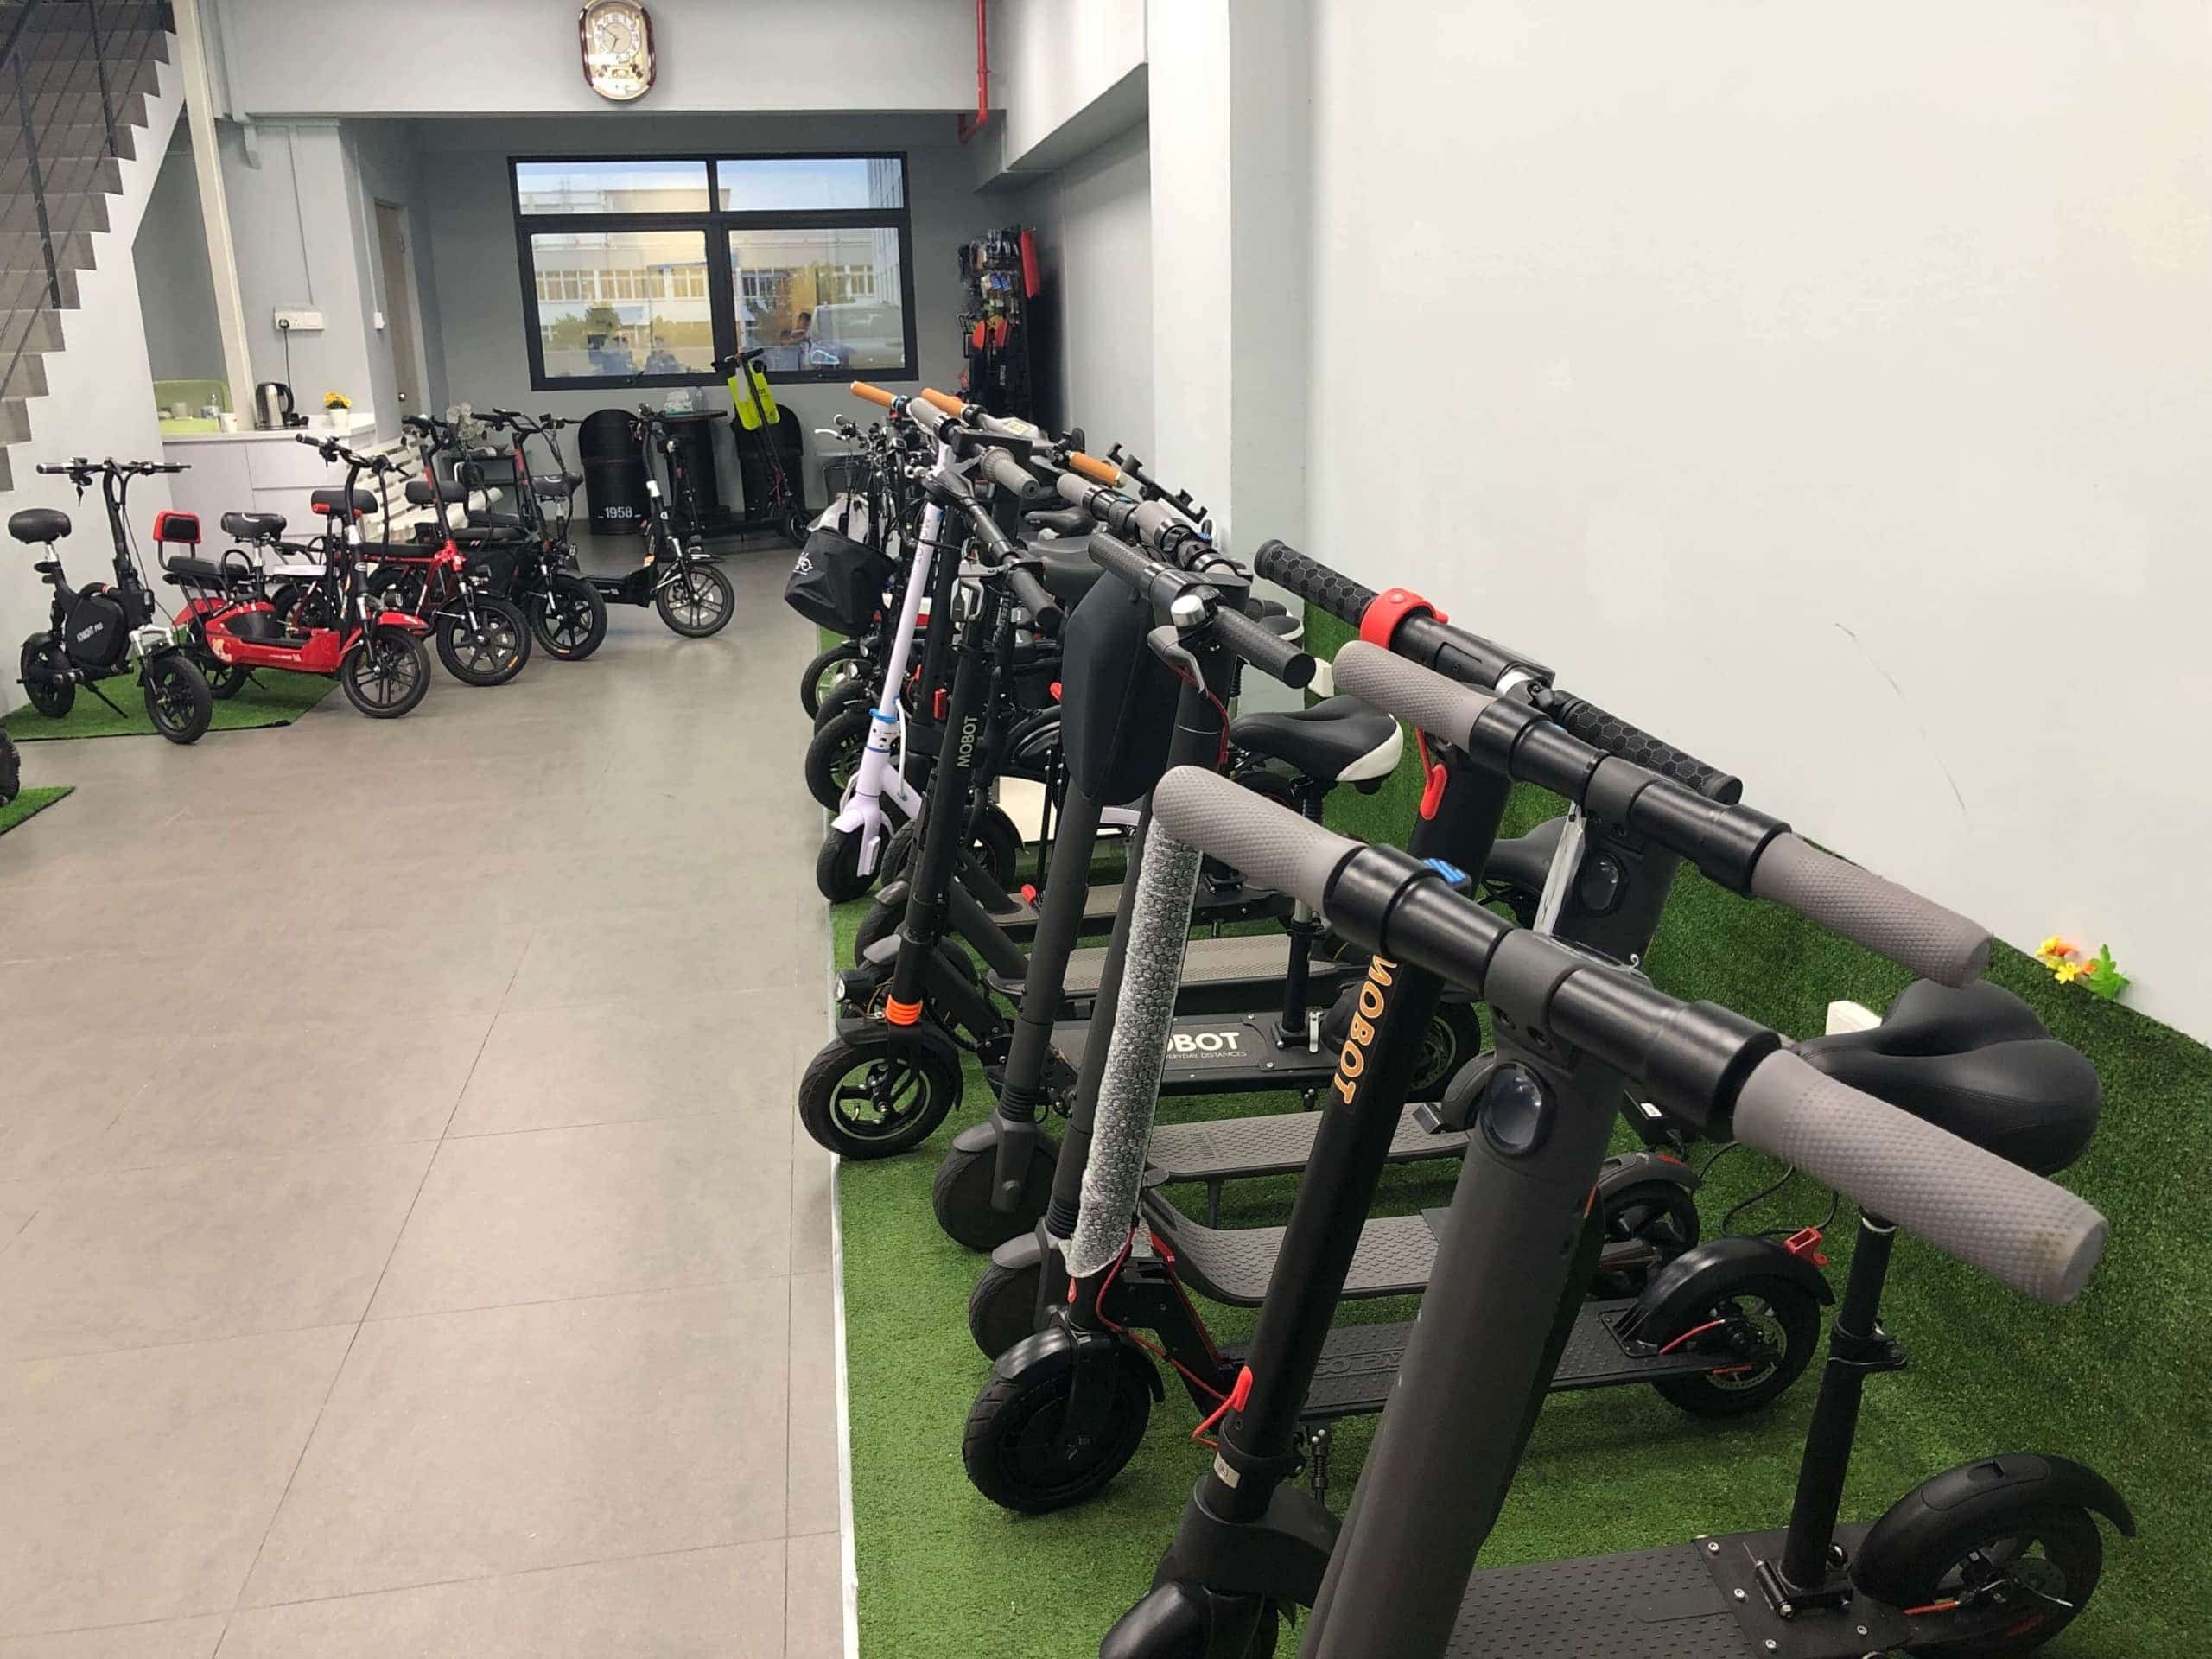 MOBOT has the largest range of UL2272 certified electric scooter